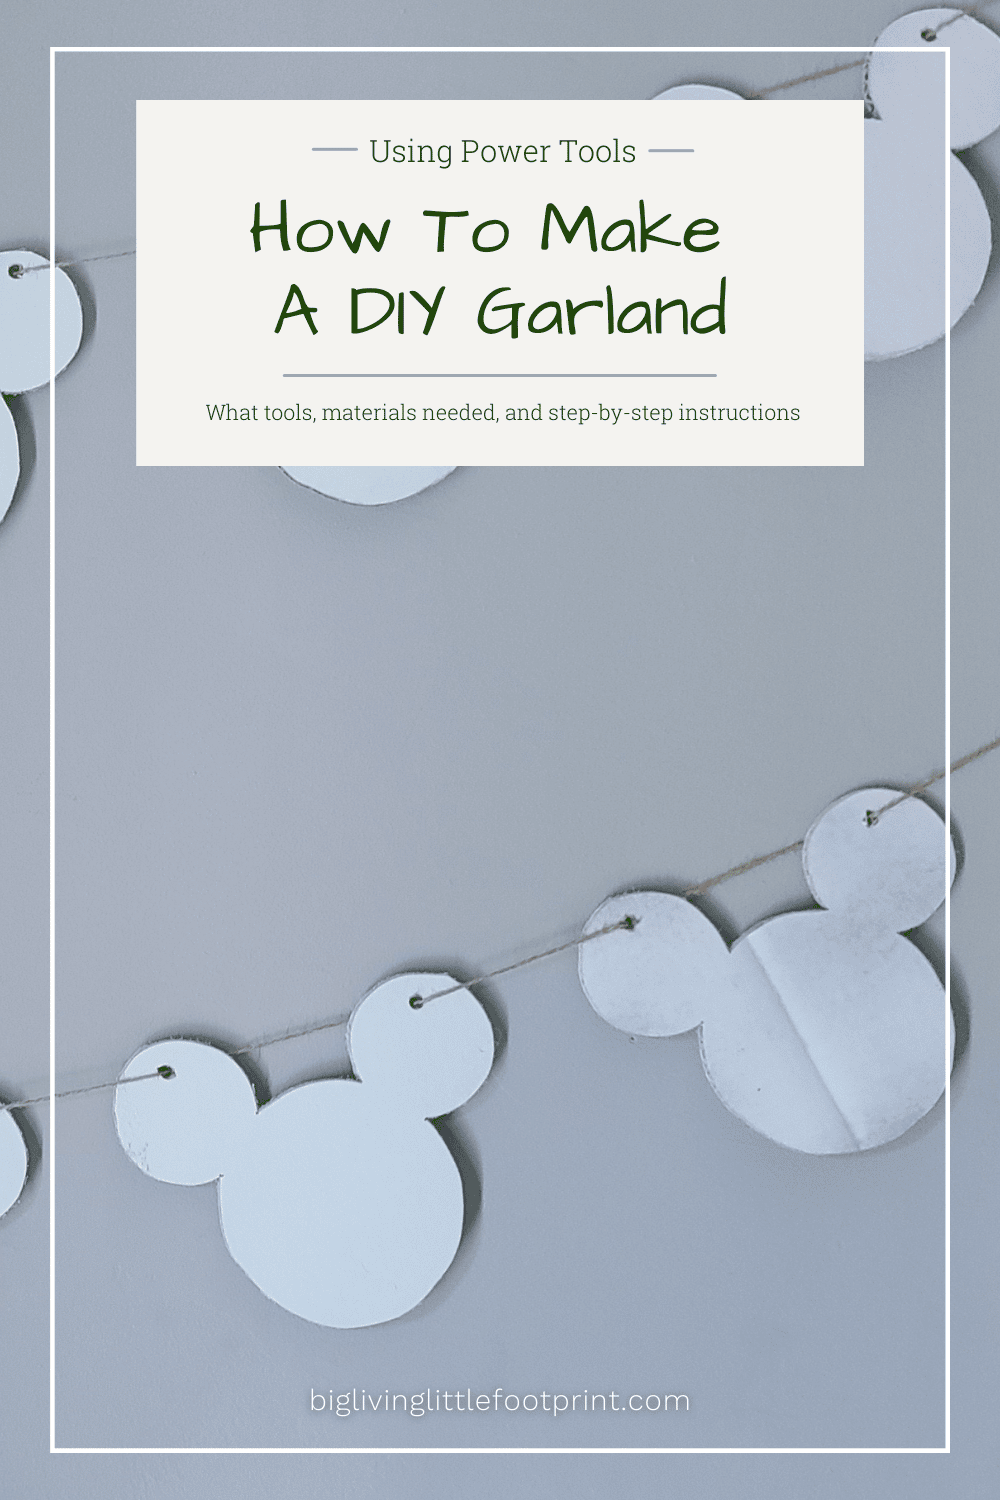 How To Make A DIY Garland Using Power Tools